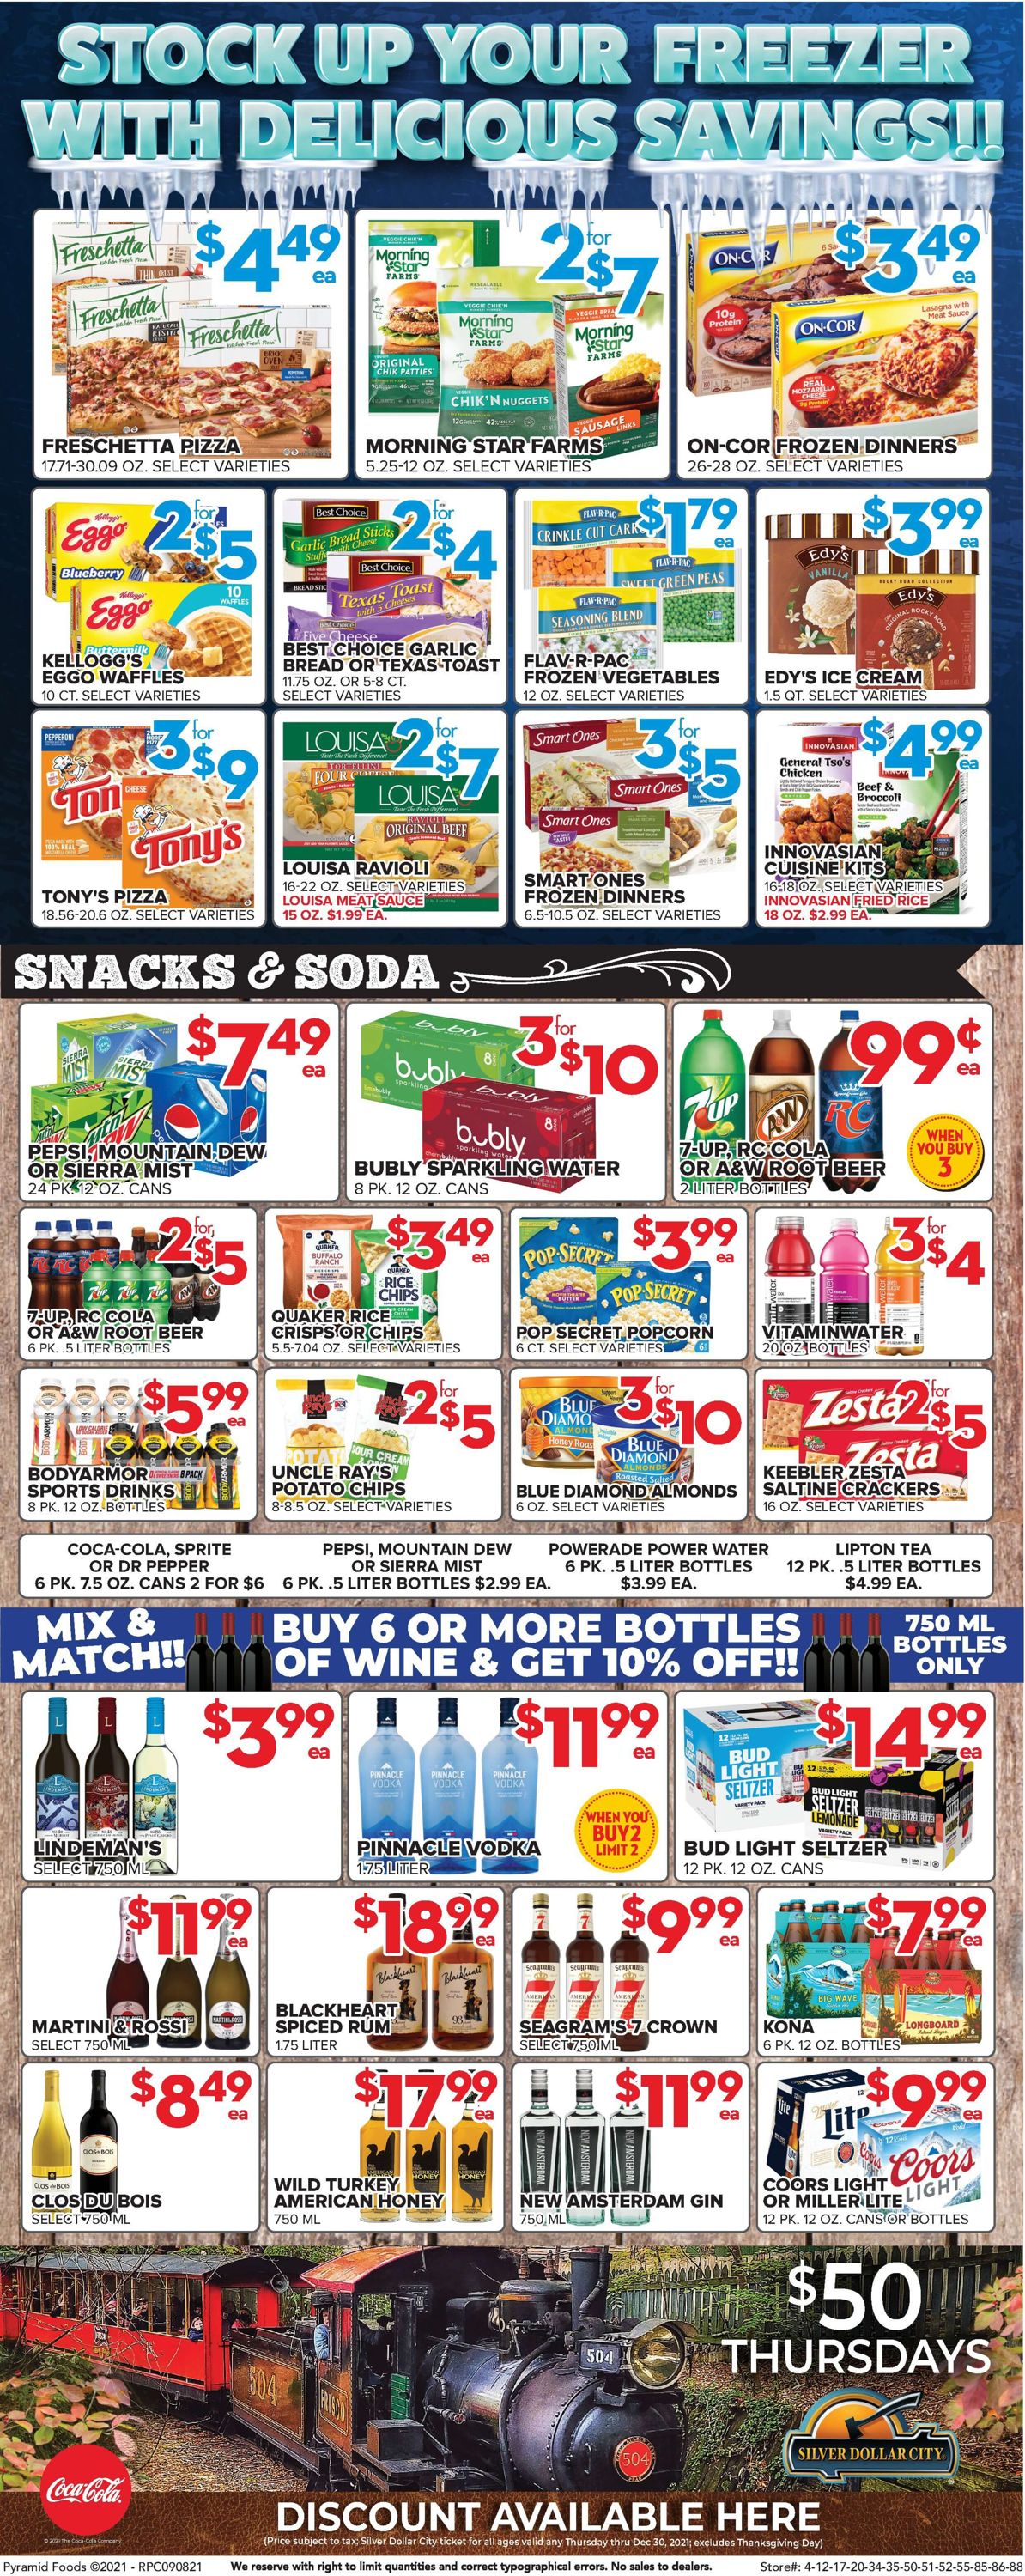 Price Cutter Weekly Ad Circular - valid 09/08-09/14/2021 (Page 4)